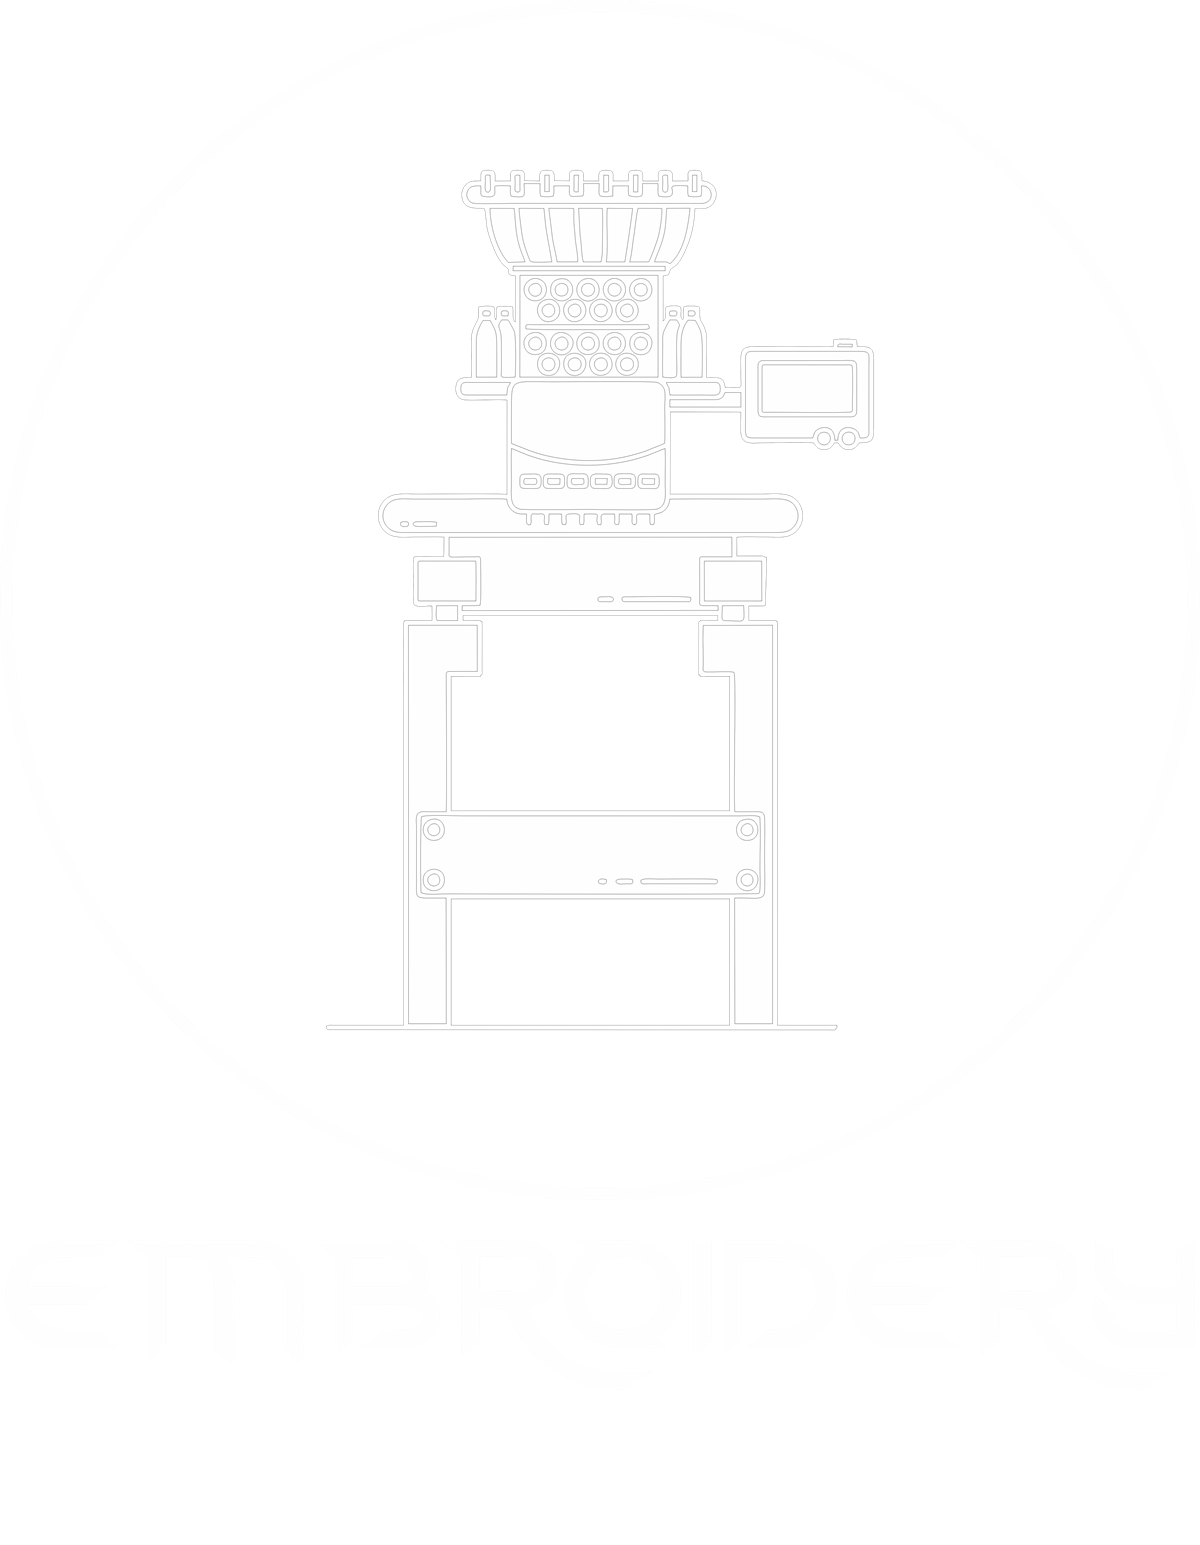 Embroidery machine inside a white circle